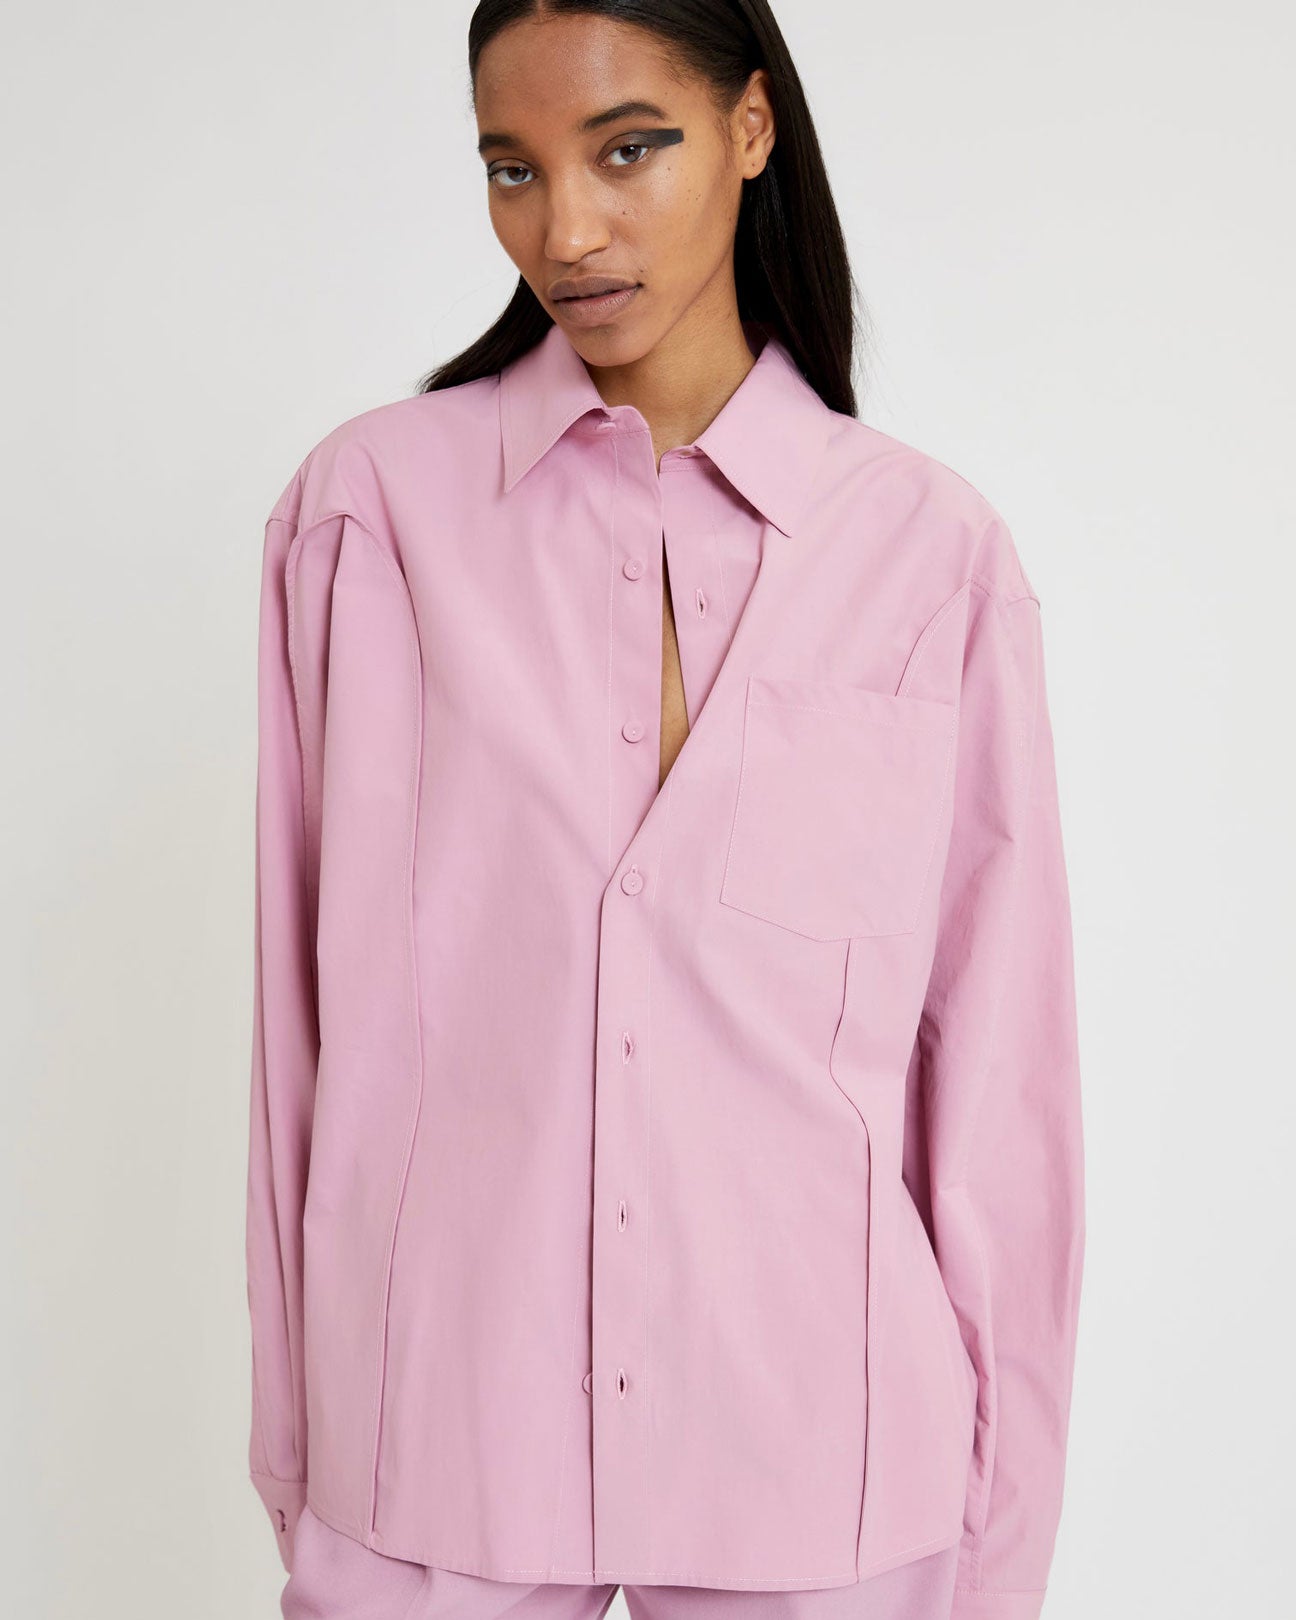 AKNVAS Cassie Shirt in Pink available at Lahn.shop